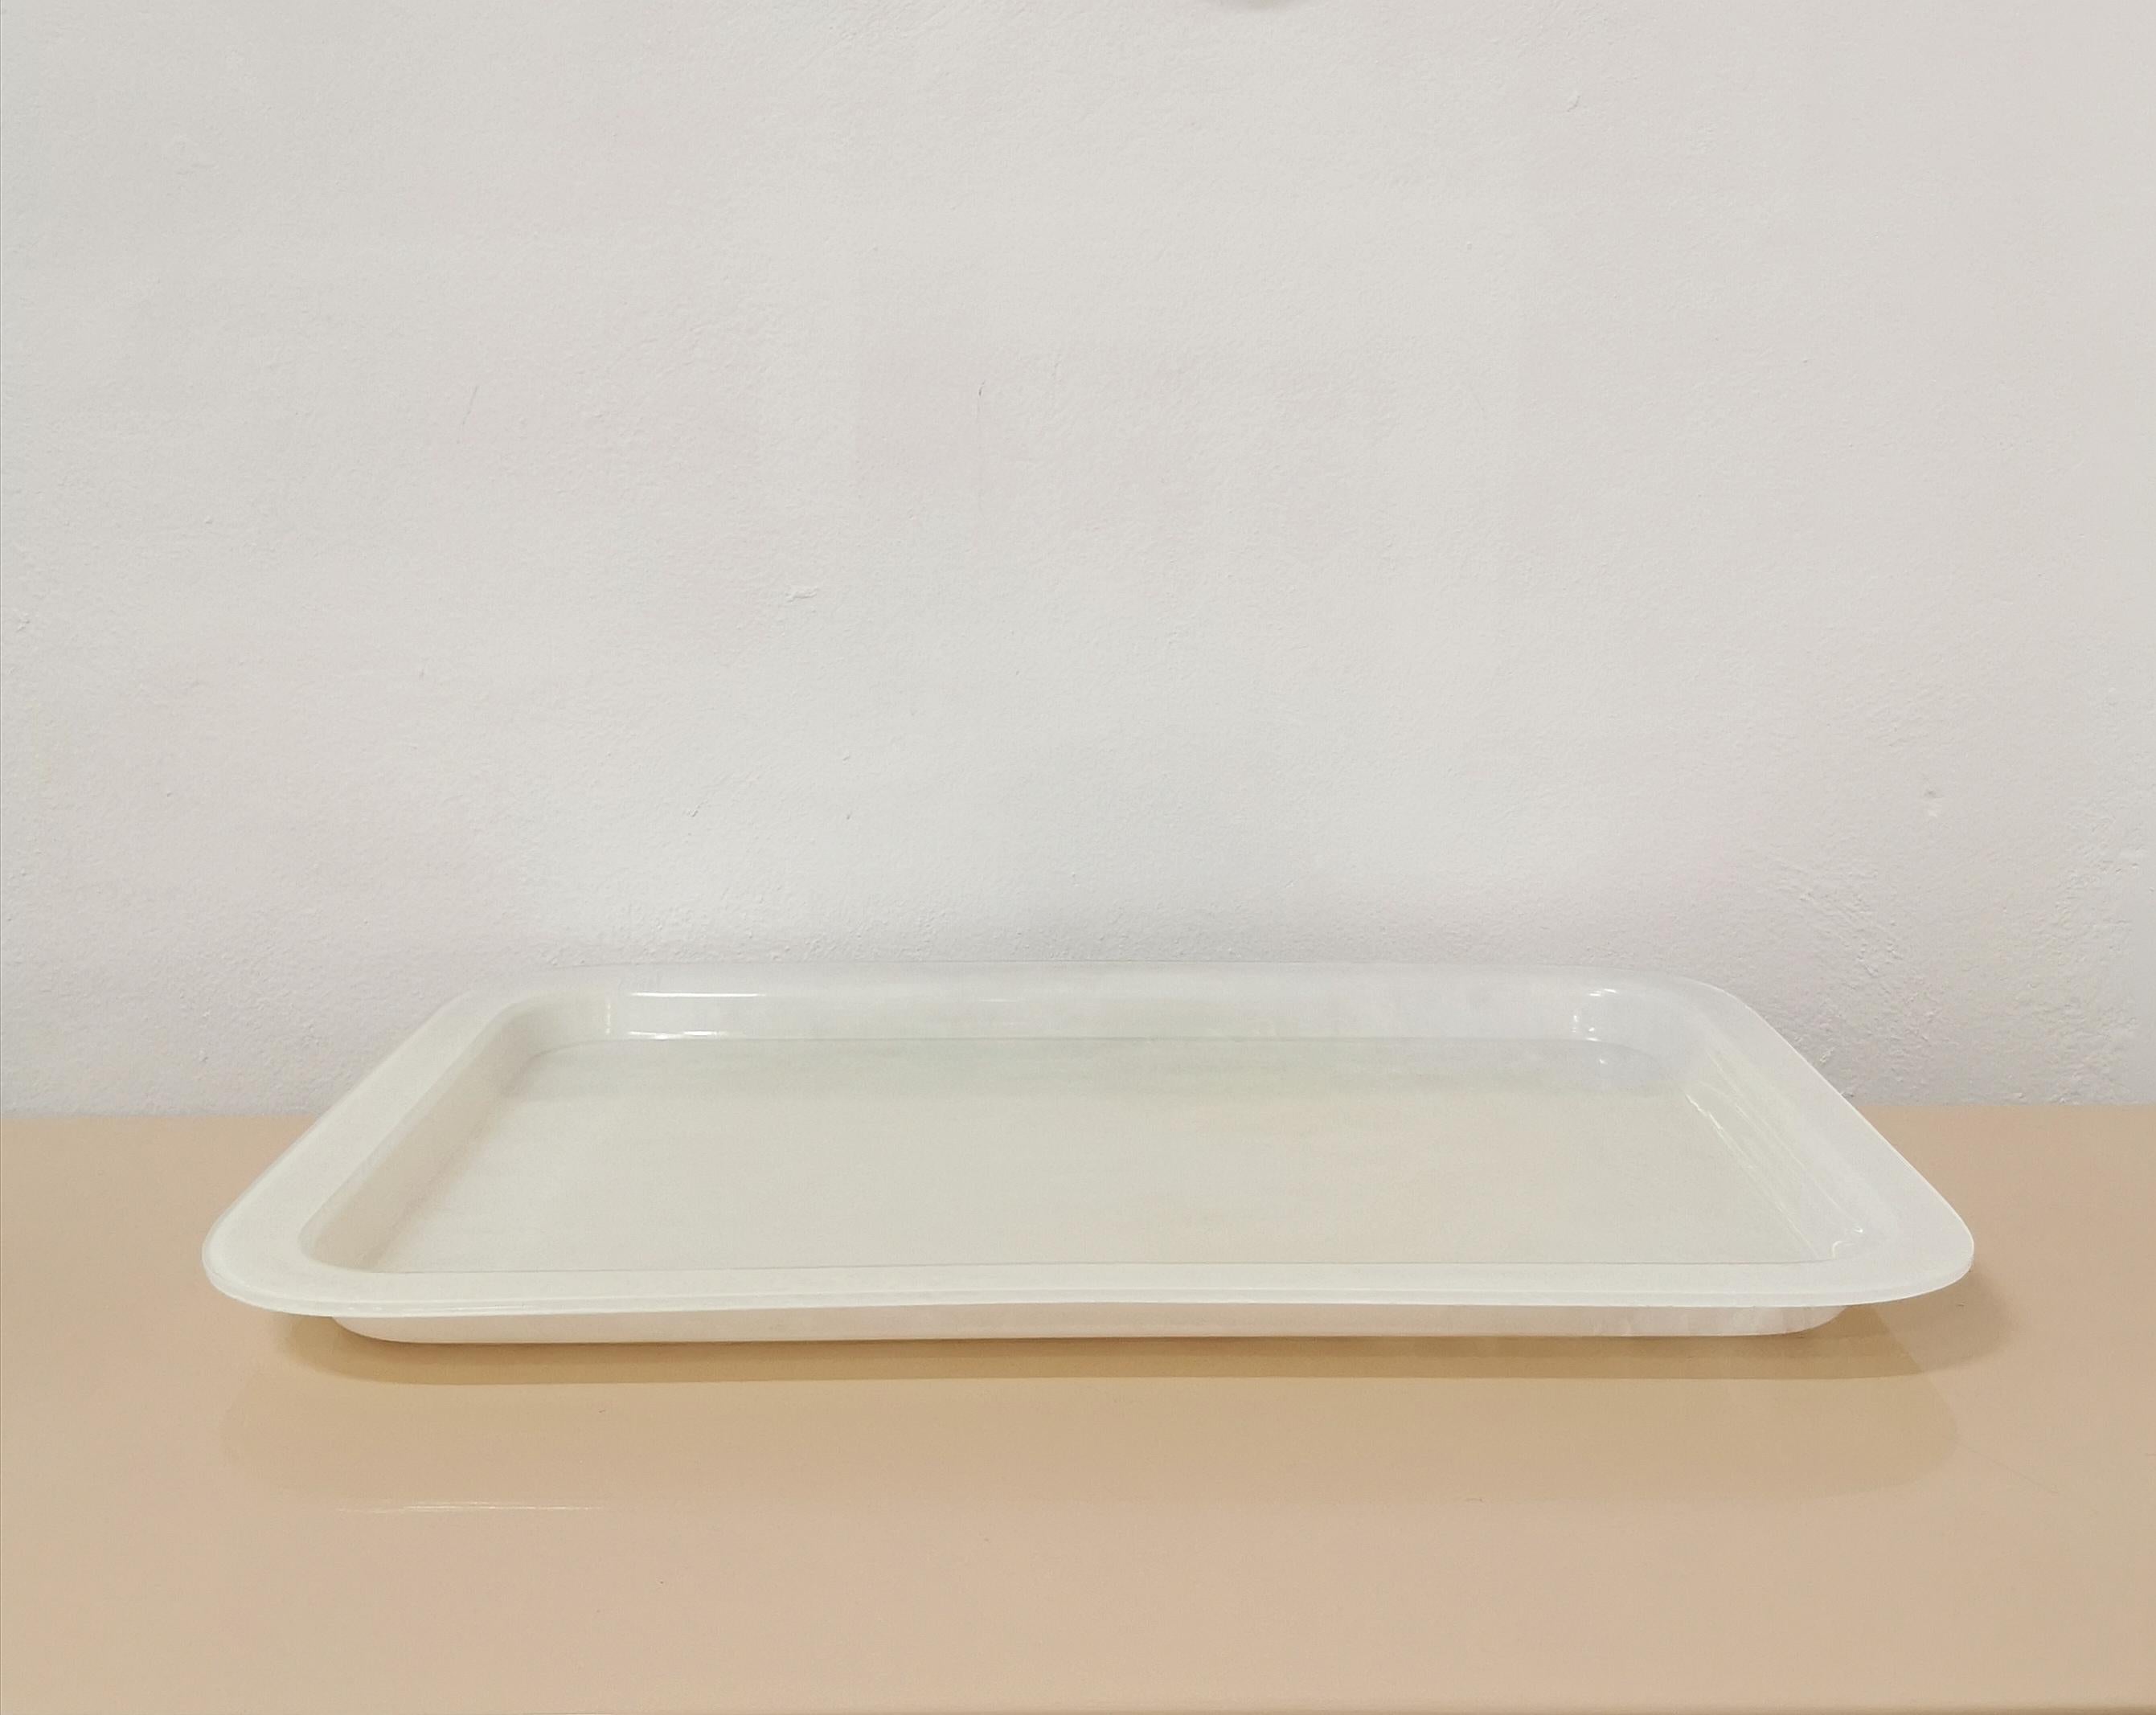 20th Century Midcentury Modern Tray Table Serving Piece Rectangular White Lucite Italy 1970s For Sale